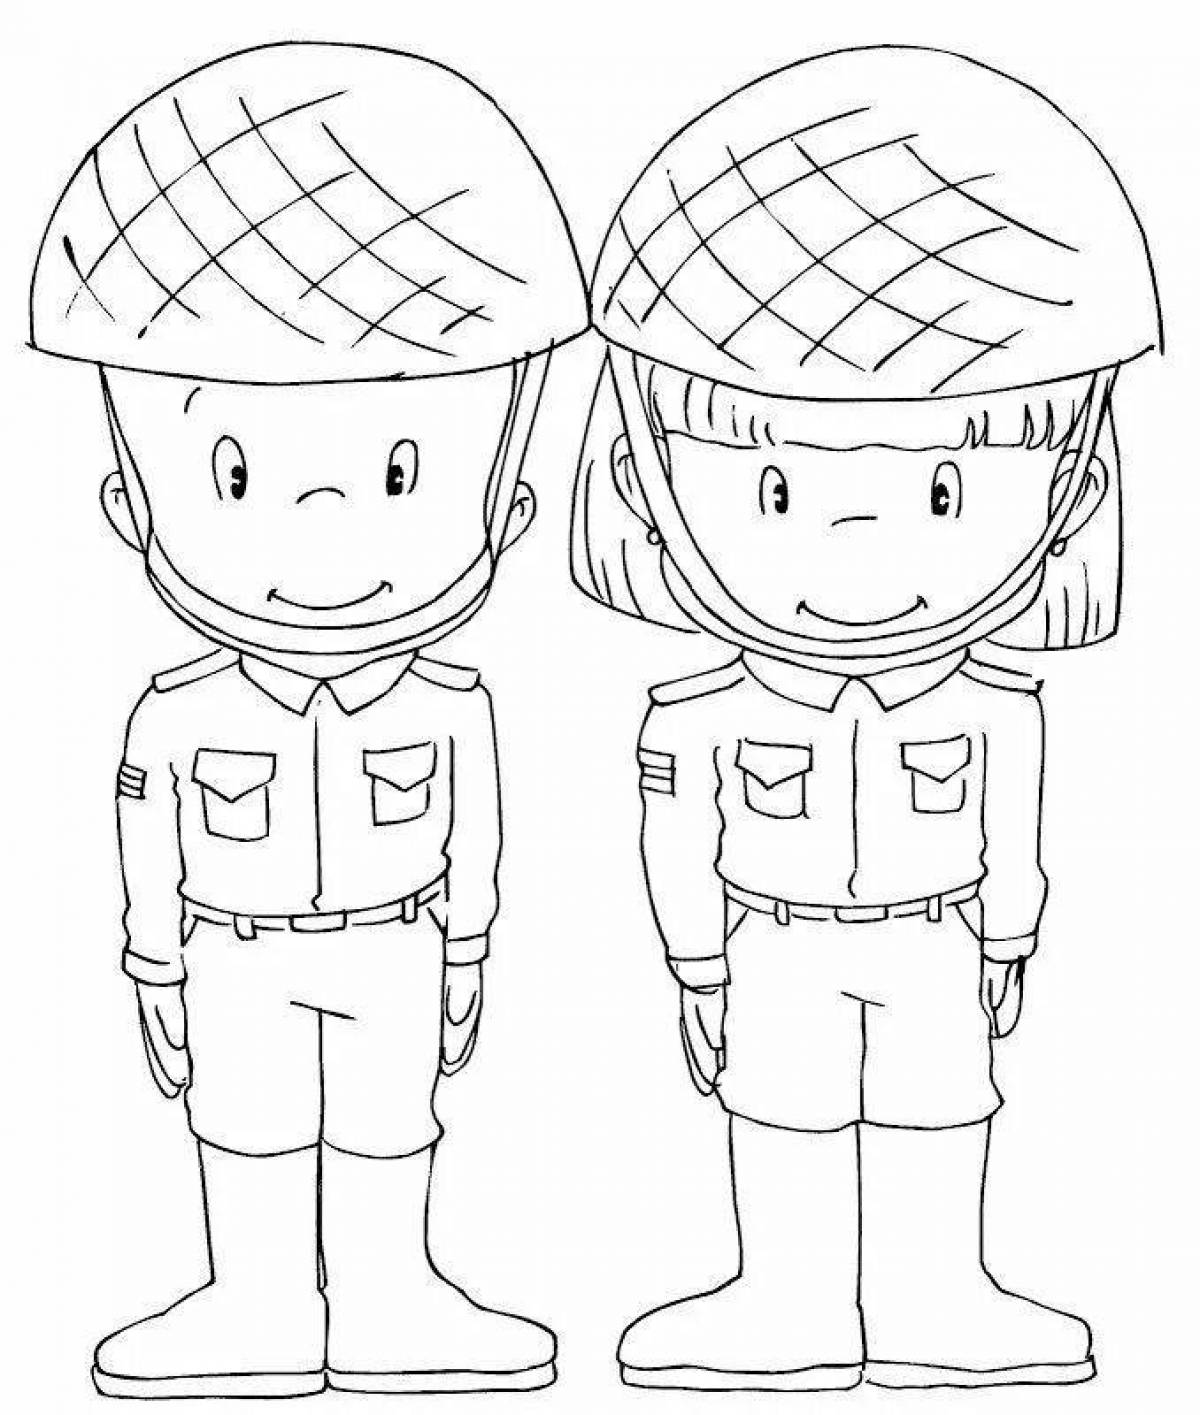 Frightening soldier figurine coloring page